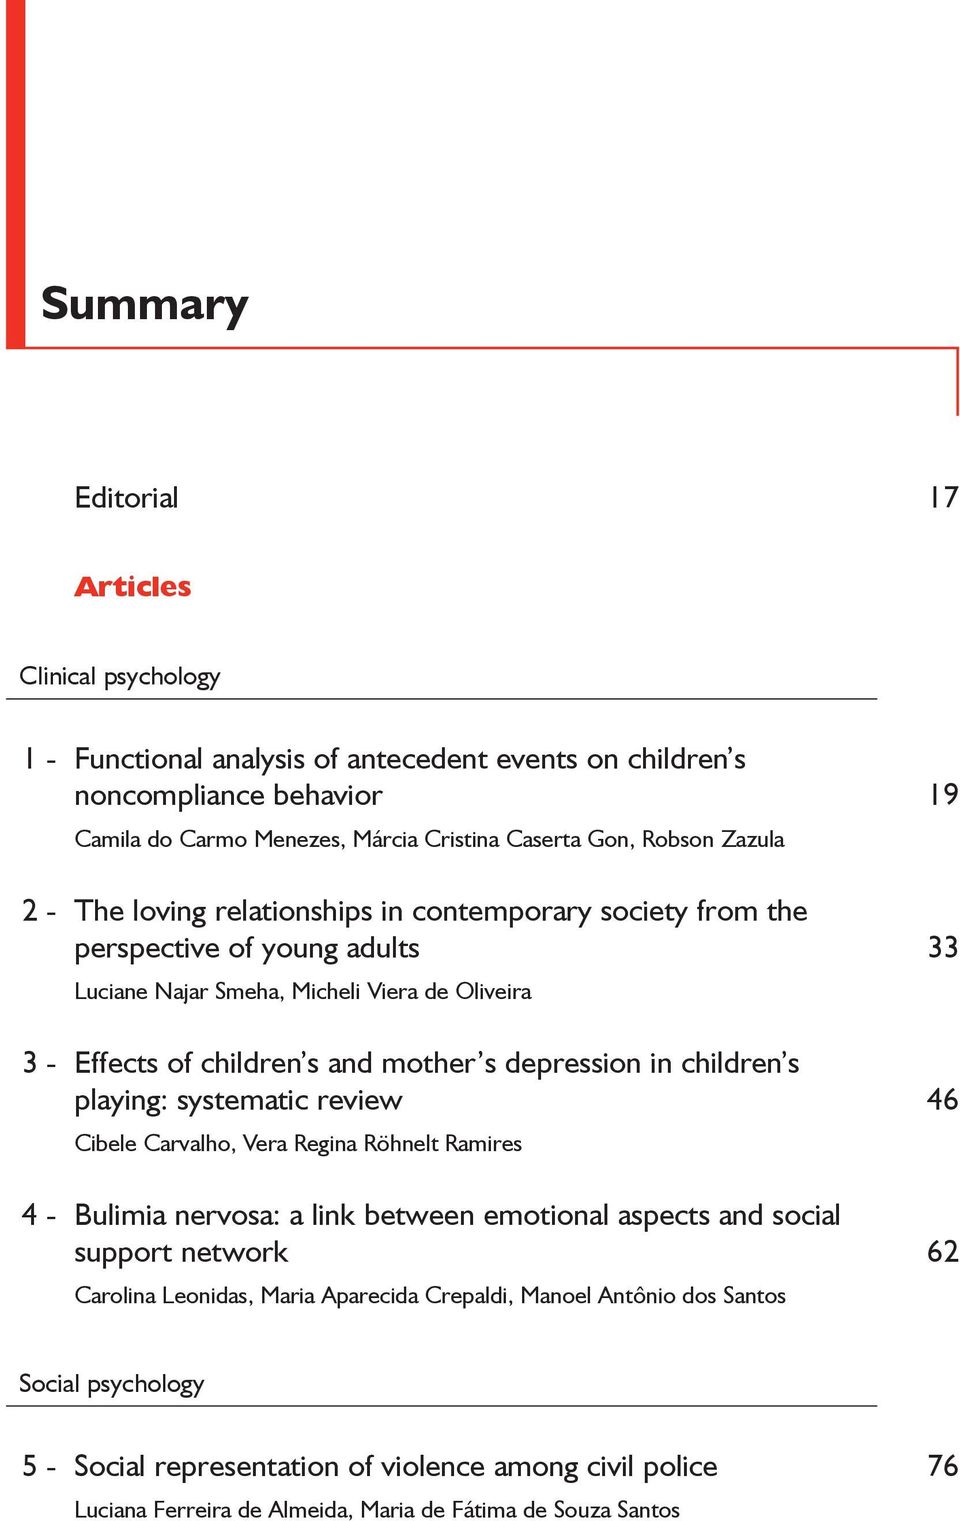 depression in children s playing: systematic review 46 Cibele Carvalho, Vera Regina Röhnelt Ramires 4 - Bulimia nervosa: a link between emotional aspects and social support network 62 Carolina